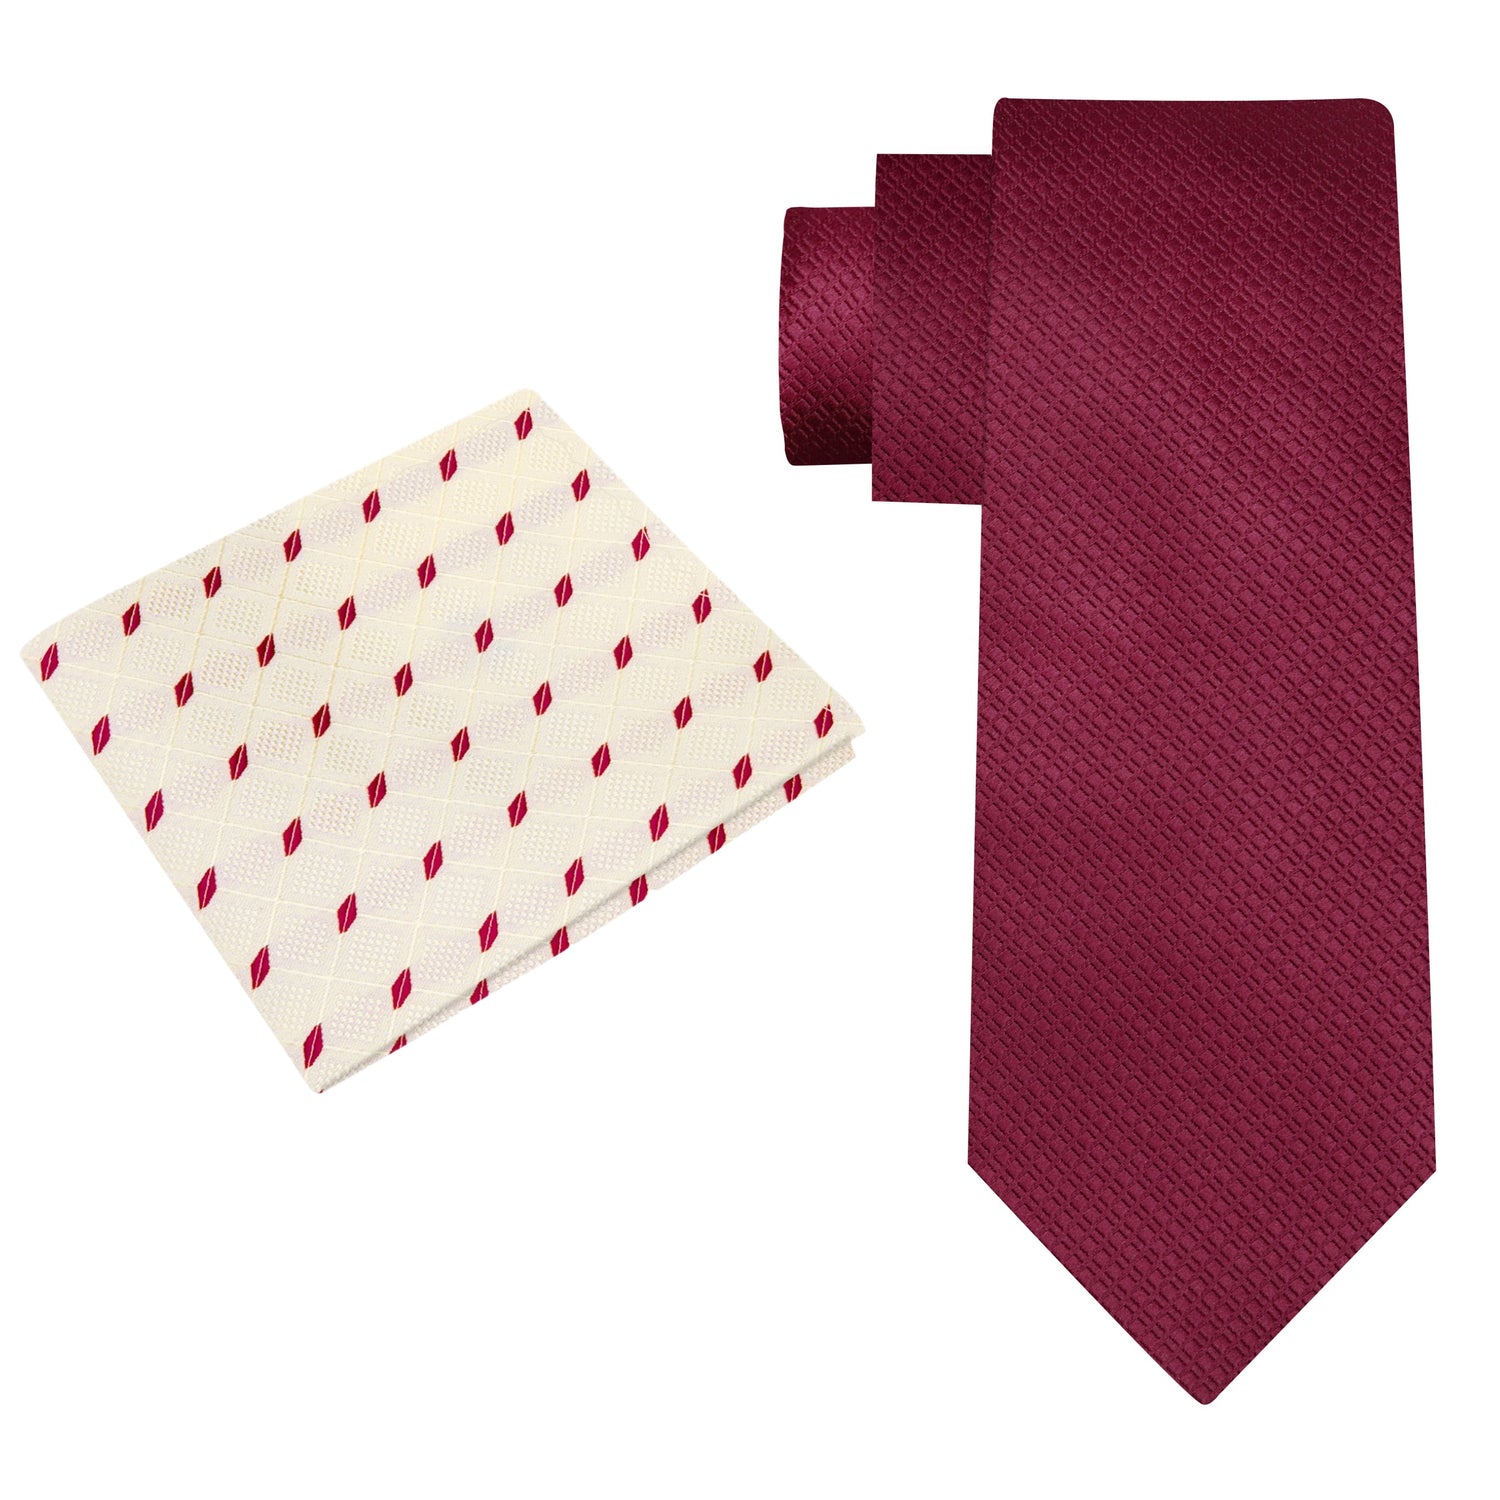 View 2: Burgundy Tie with Accenting Square